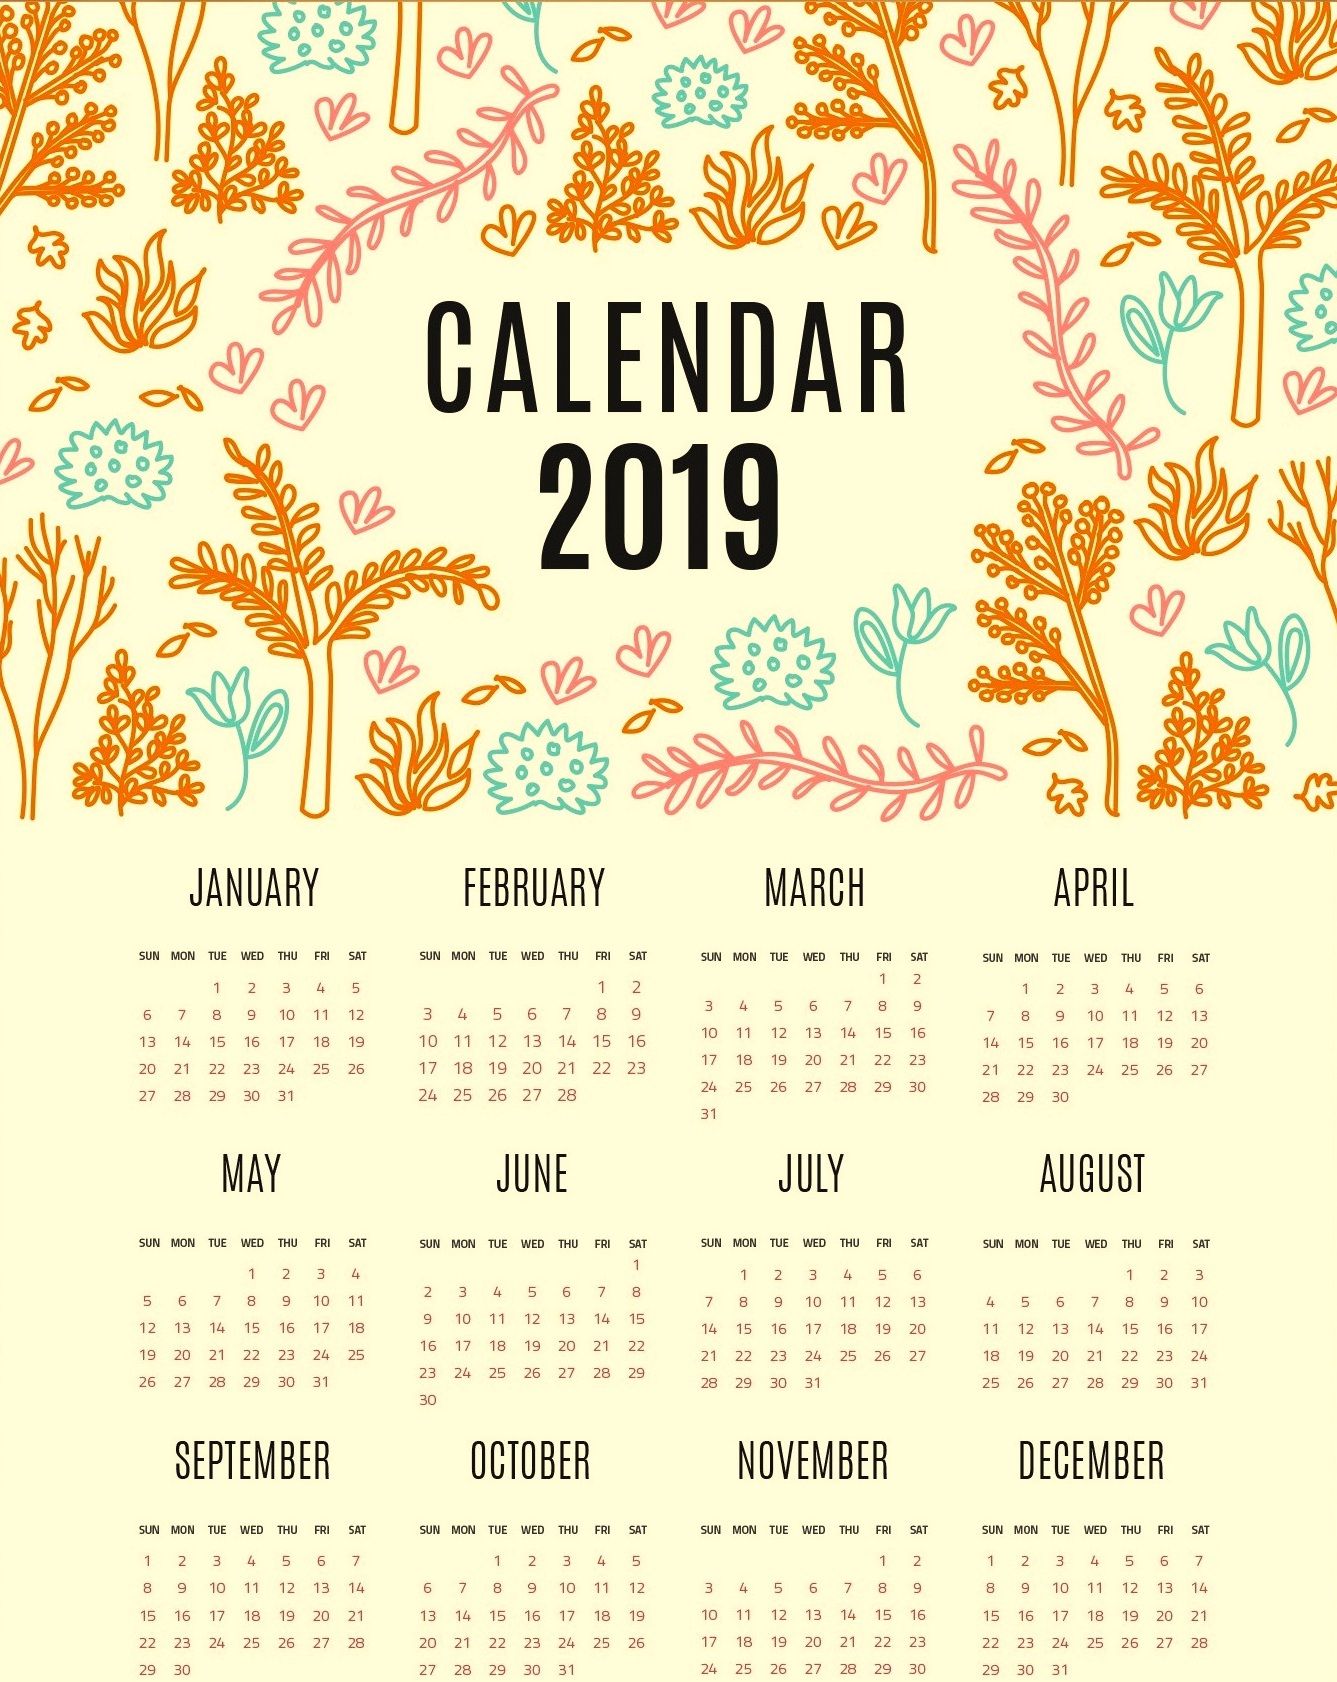 Calendar Wallpaper - Calendar Wallpaper 2019 , HD Wallpaper & Backgrounds